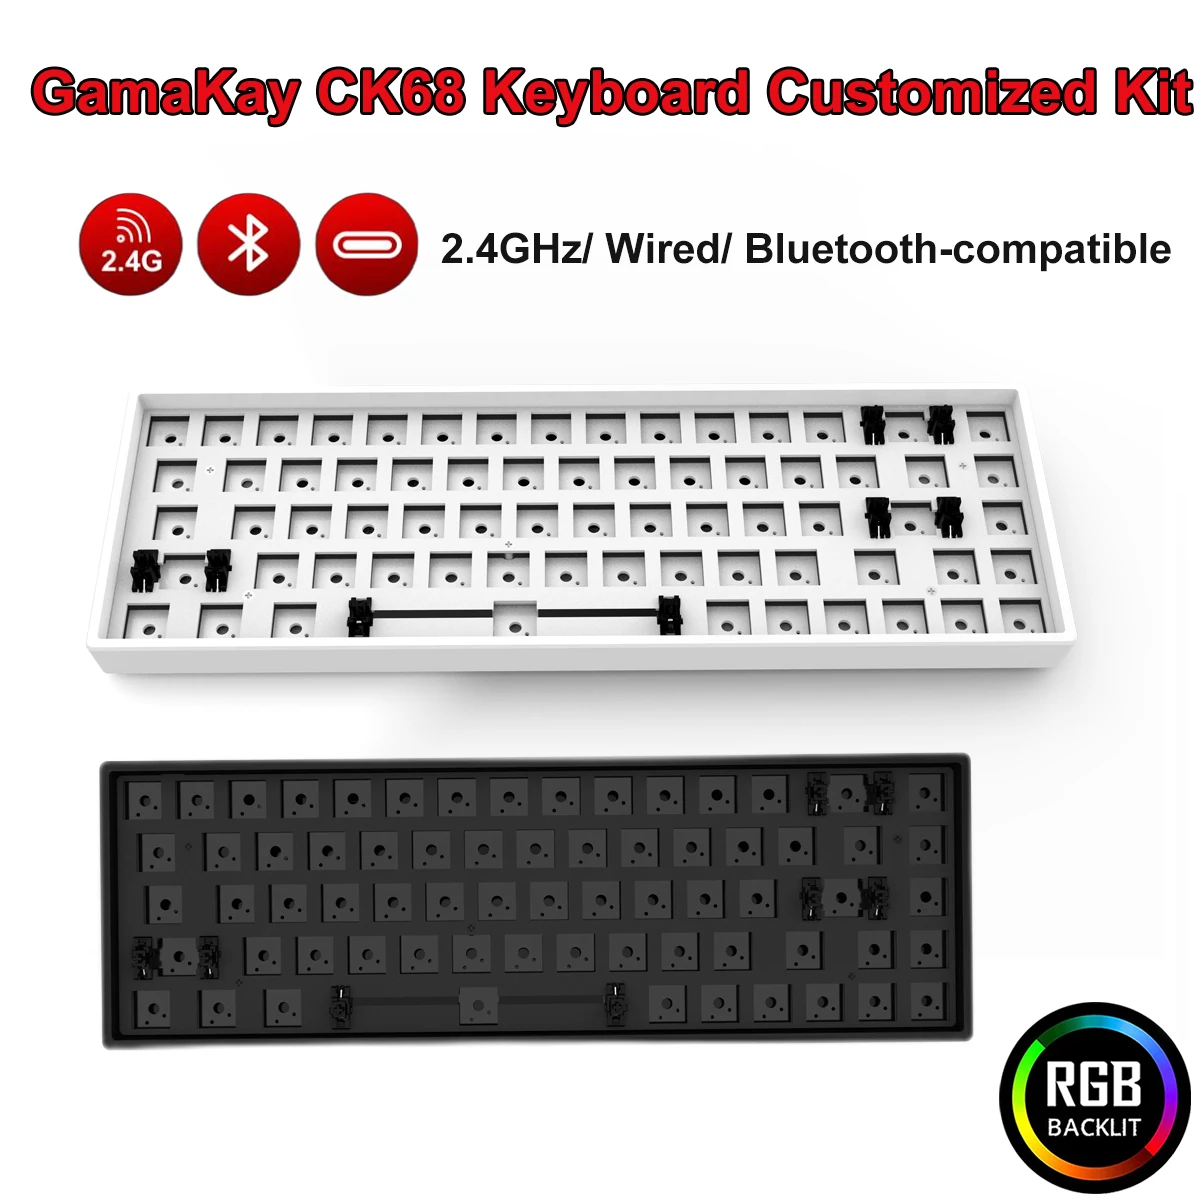 GamaKay CK68 Mechanical Keyboard Customized Kit RGB Hot Swappable Wired/ Bluetooth-compatible/ 2.4GHz PCB 65% NKRO Keyboard Kit